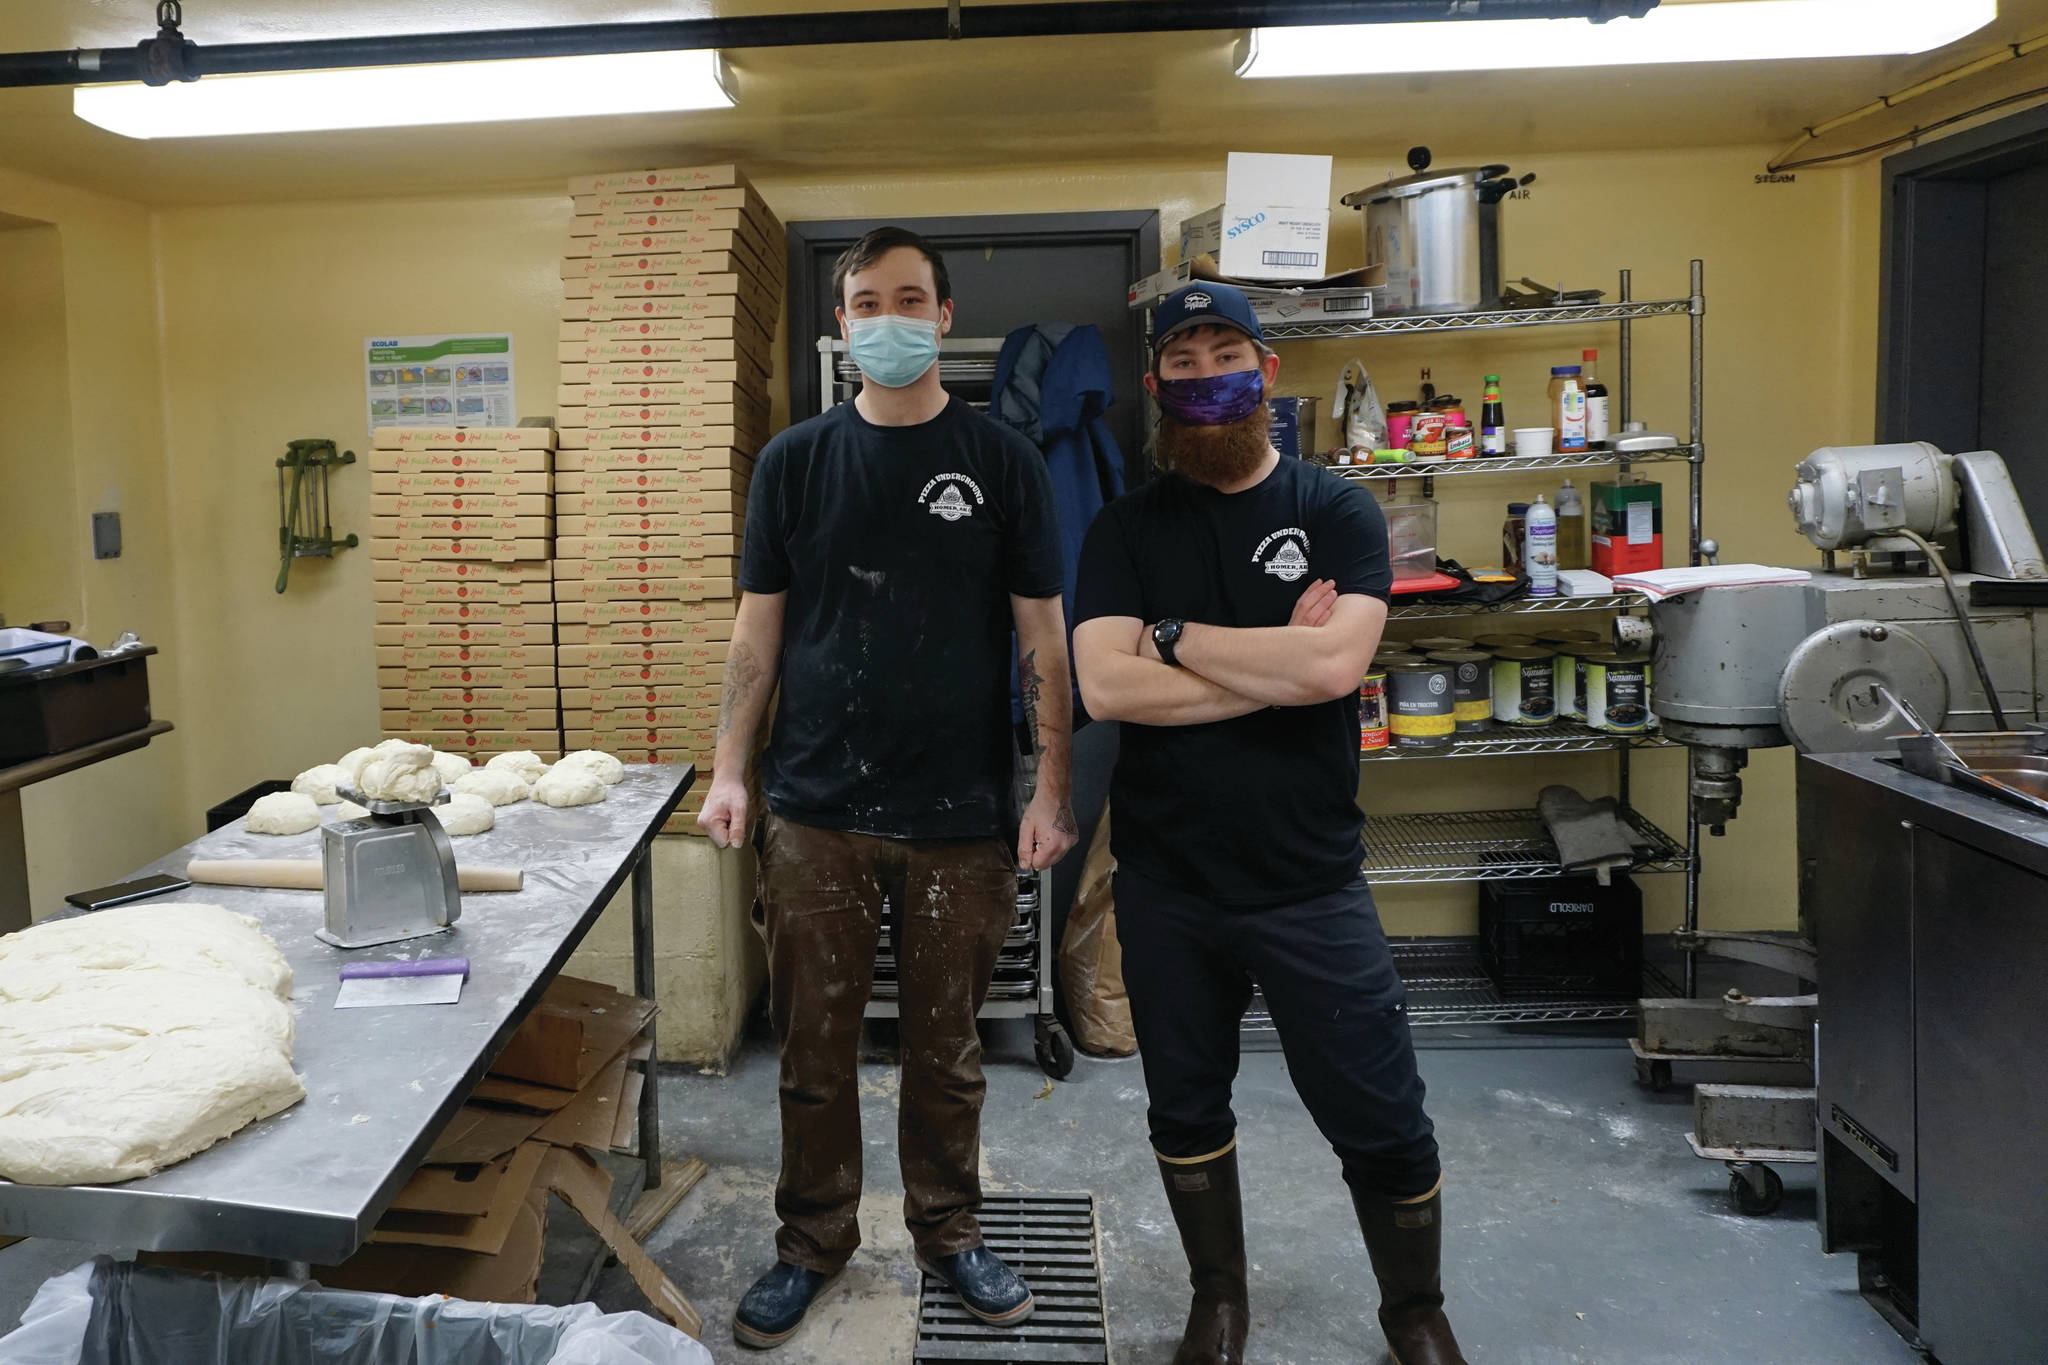 Pizza Underground owner Ethan Eutsler, right, and coworker Jack Pierre, left, take a break from making pizza dough on Tuesday, Dec. 1, 2020, the opening day of the business, in the basement of Alice's Champagne Palace in Homer, Alaska. (Photo by Michael Armstrong/Homer News)